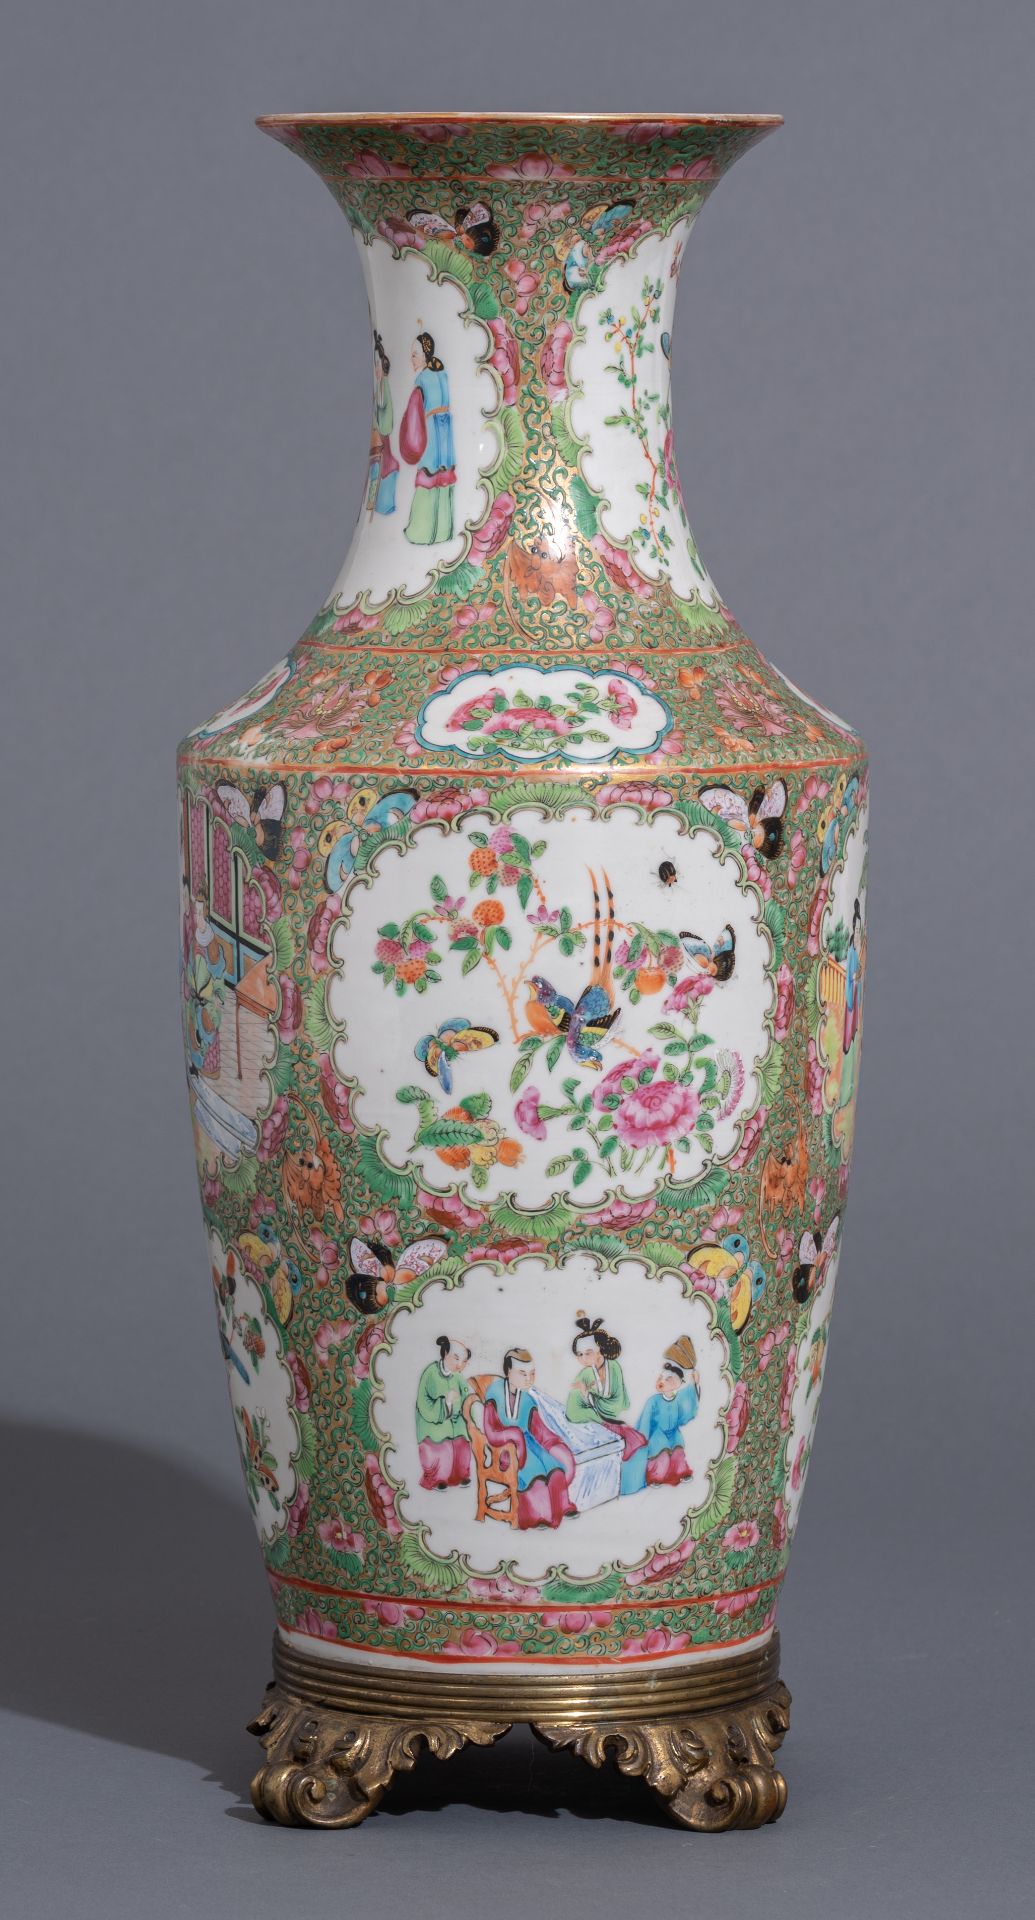 A collection of Chinese and Japanese porcelain items, 18th / 19th / 20thC, H 4 - 47 - ø 10,5 - 23 cm - Image 2 of 19